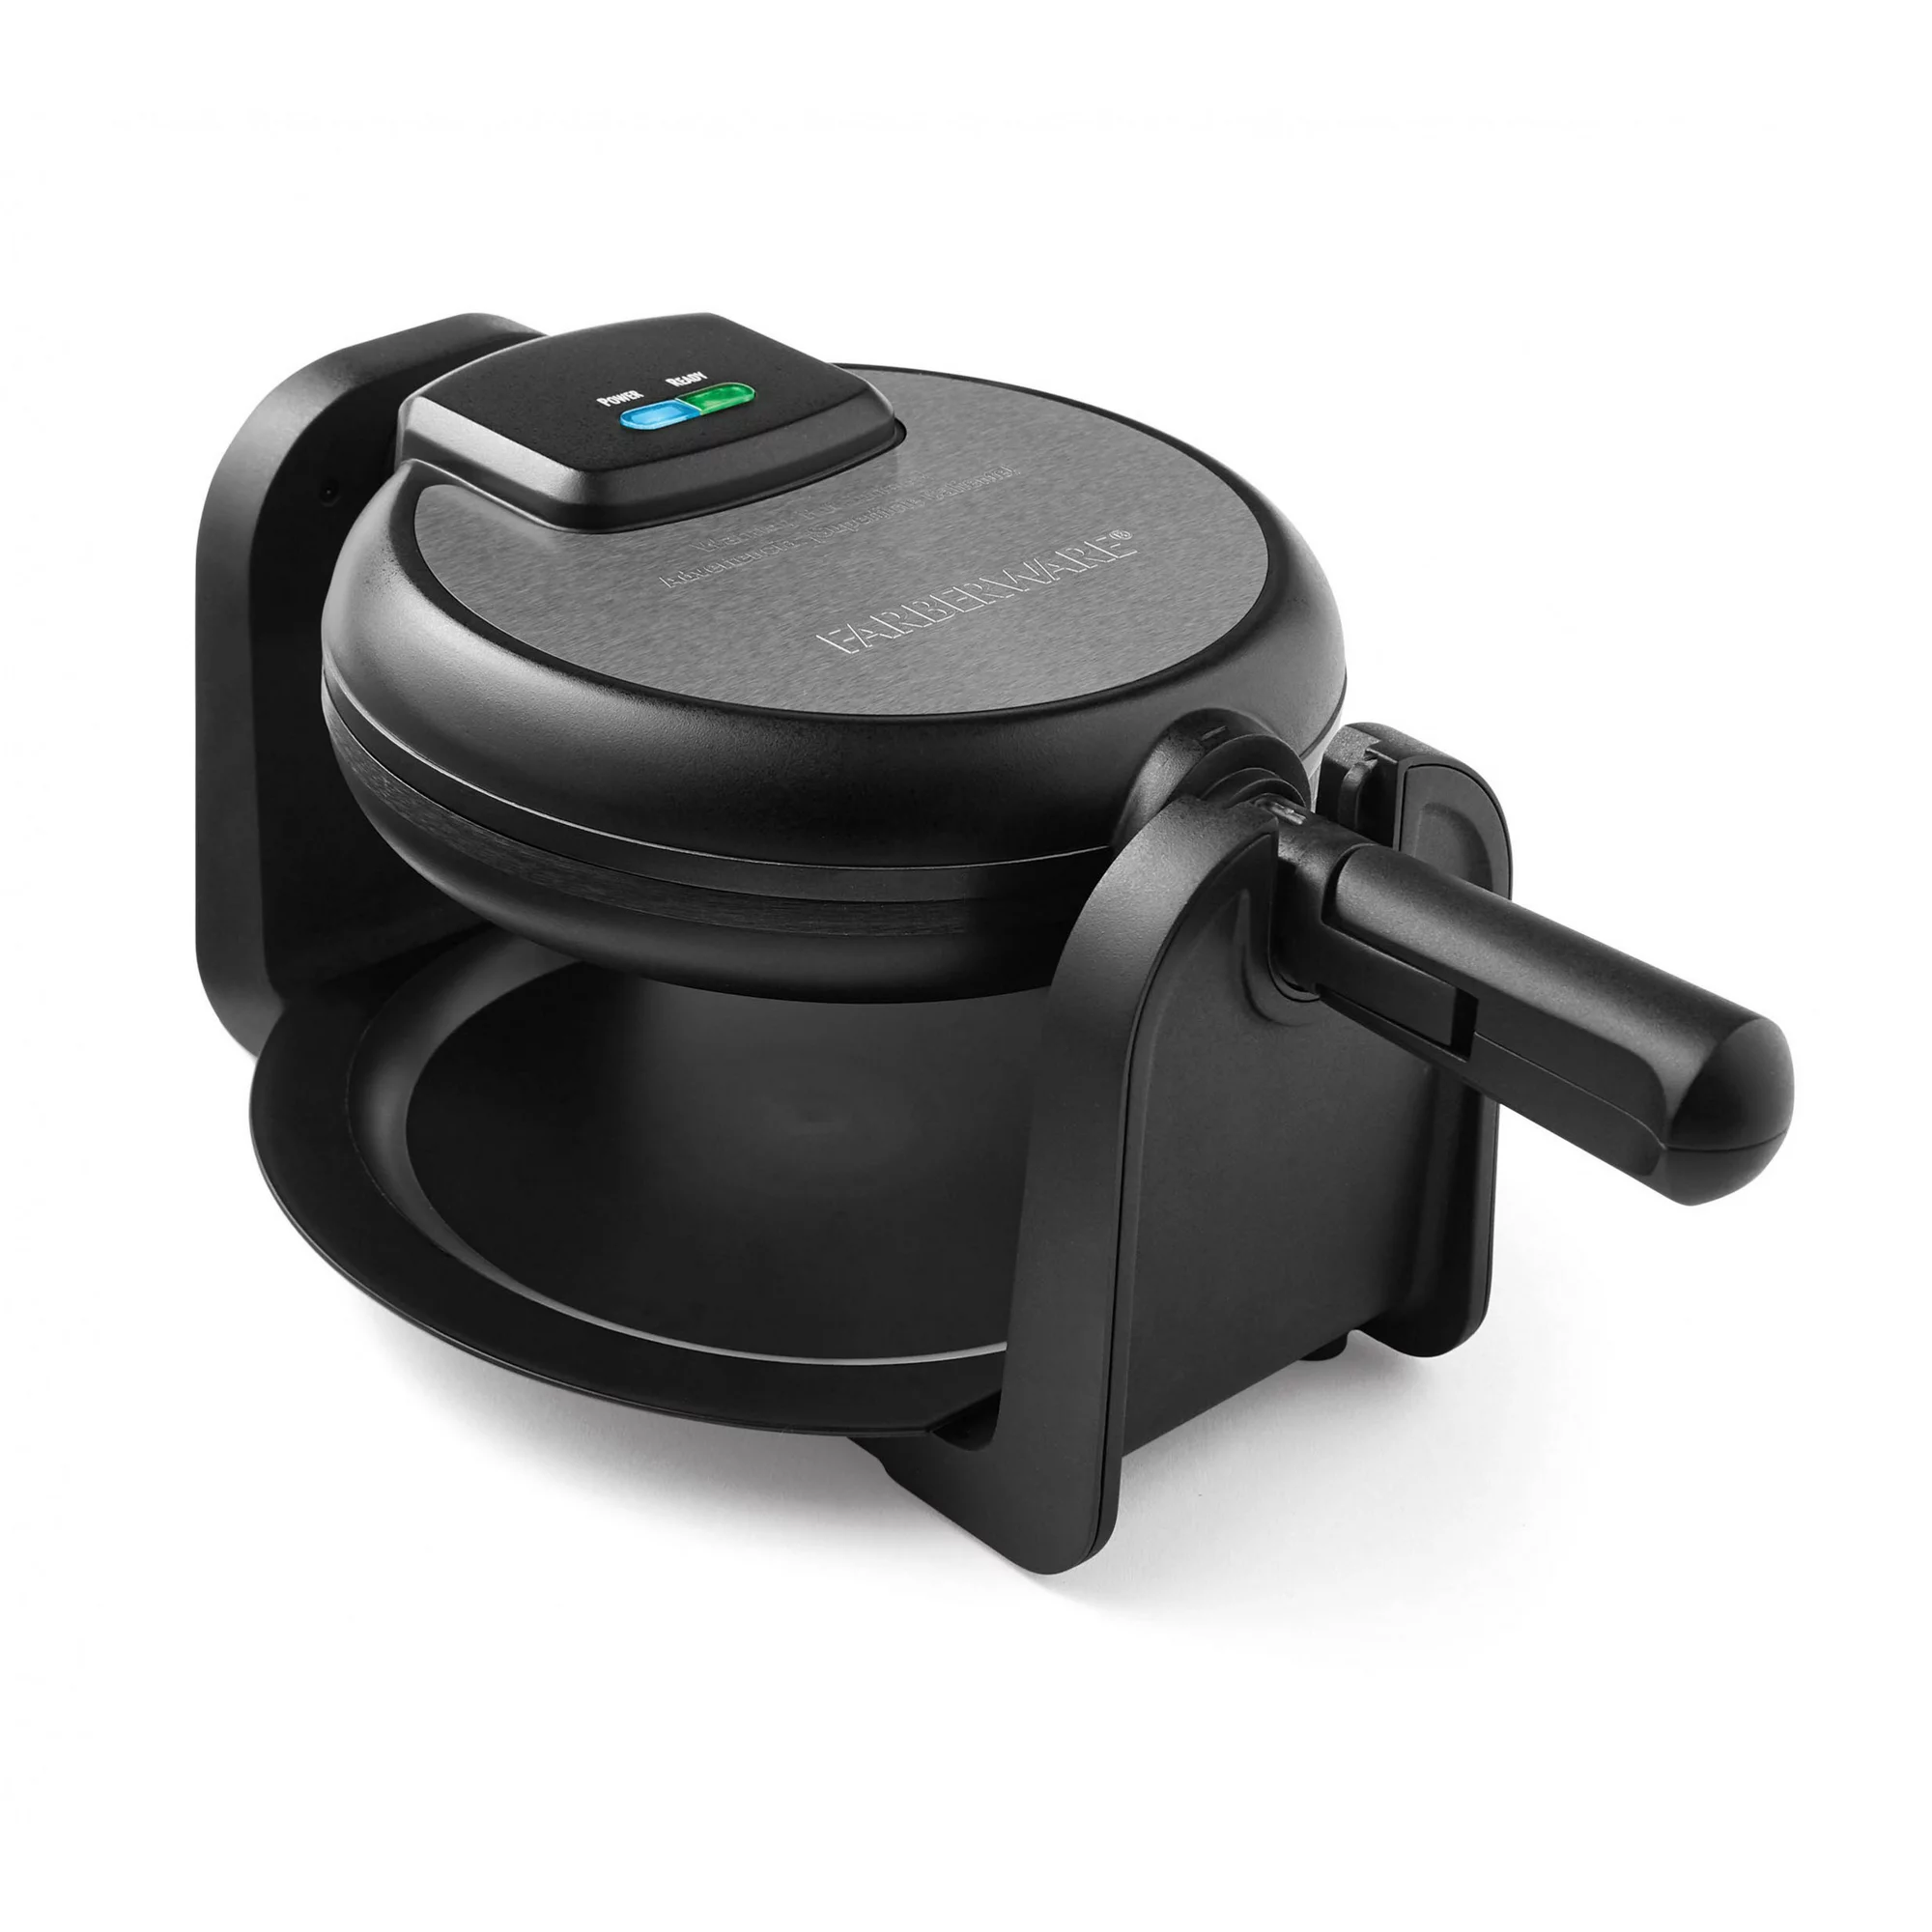 Farberware Single-Flip Waffle Maker, Black with Stainless Steel Decoration - $78.74